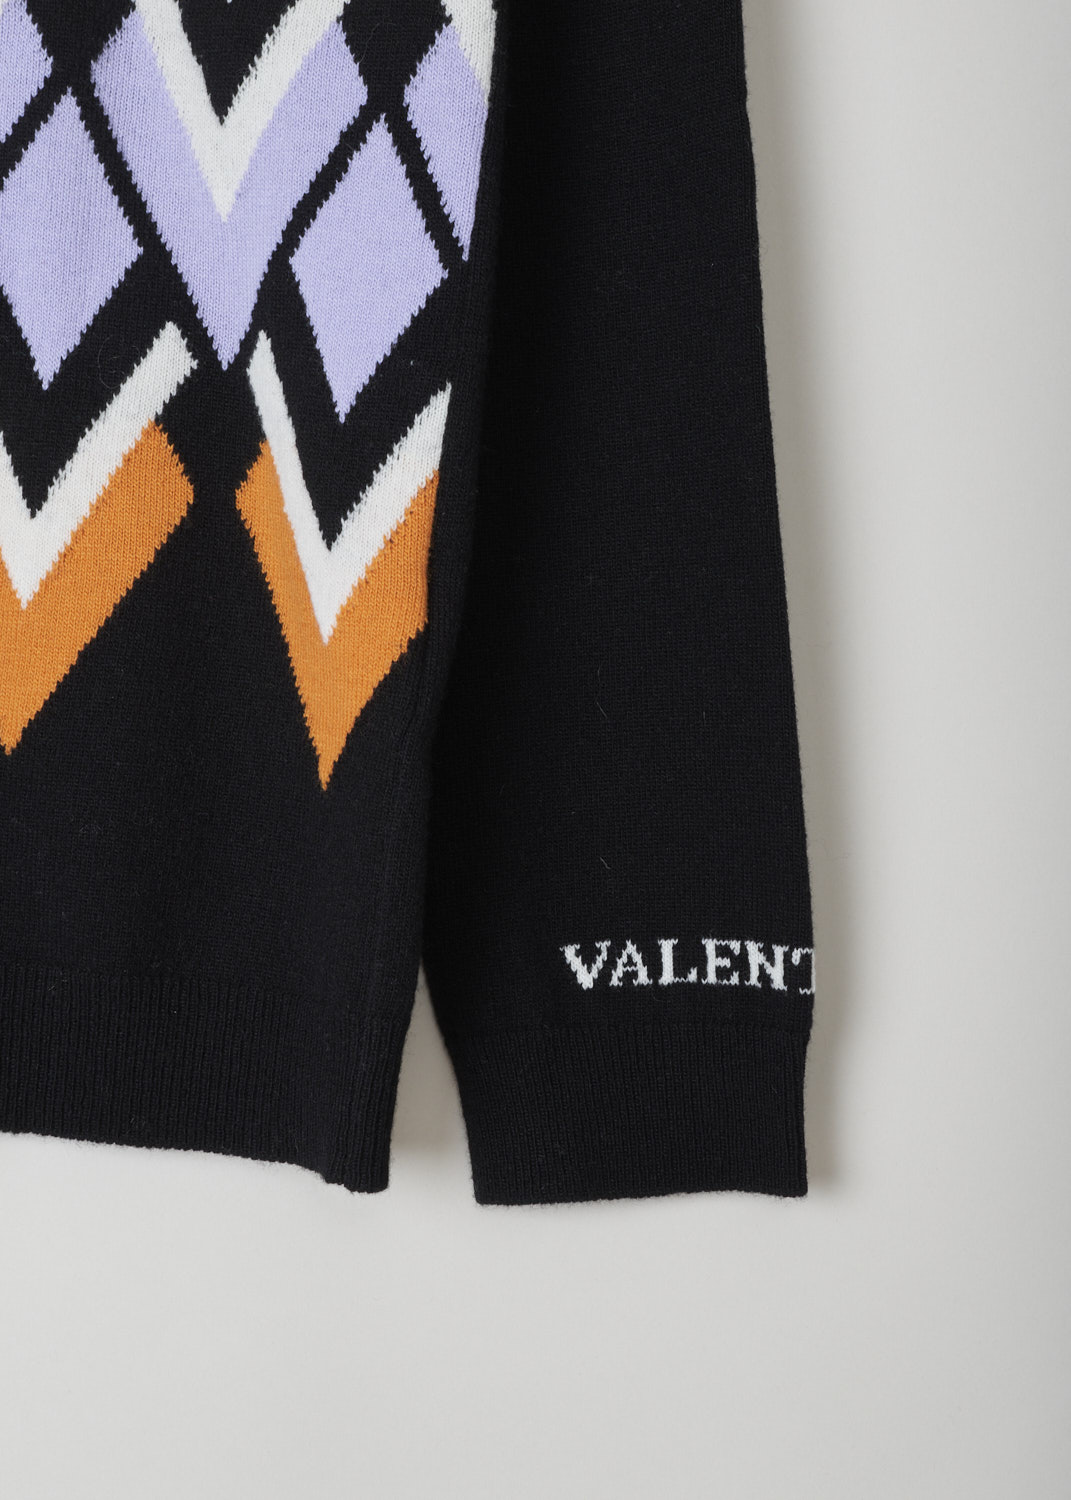 Valentino, Multi-coloured argyle pattern sweater, UB3KC15S5N8_K92, black white orange, detail, A black sweater, colored white on the front which is decorated with a lovely multi-colored argyle patter. Featuring a v-shaped neckline and long sleeves.